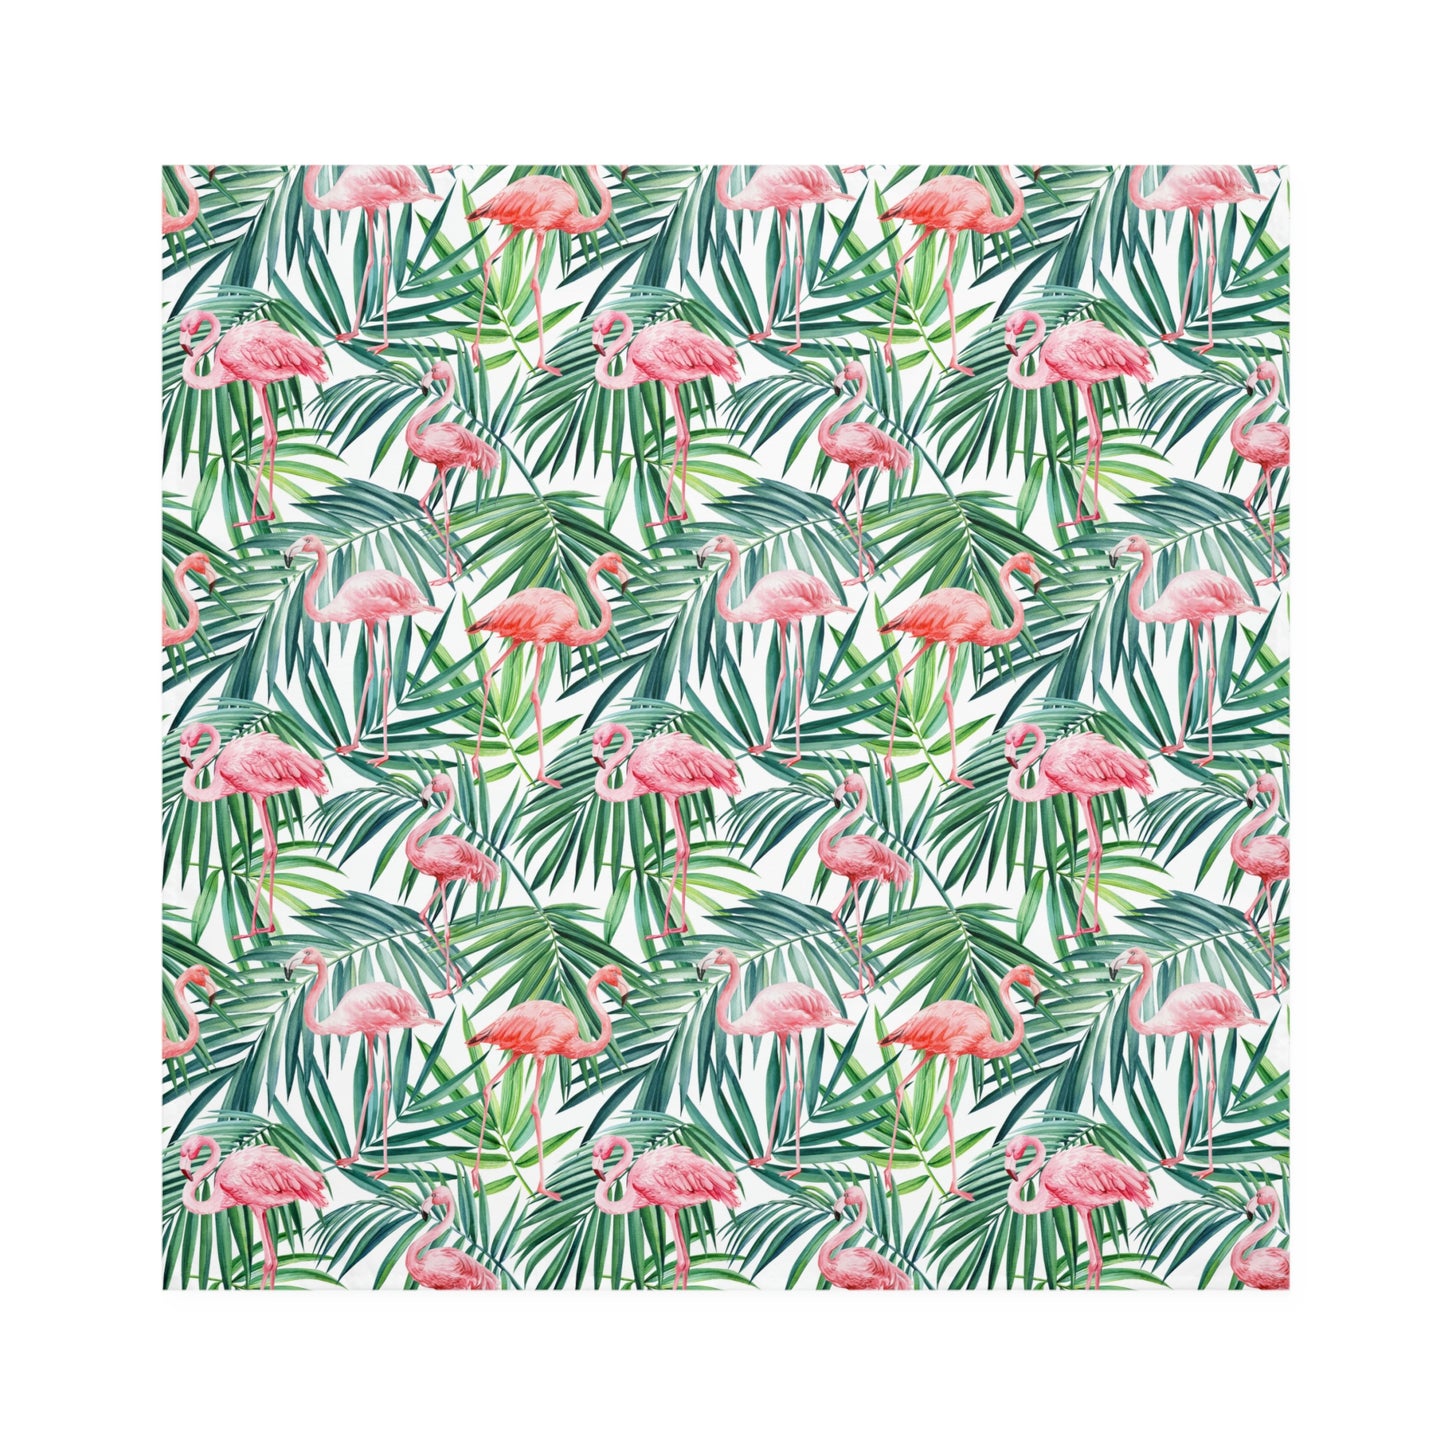 Pink Flamingos and Palm Leaves Napkins Set of 4